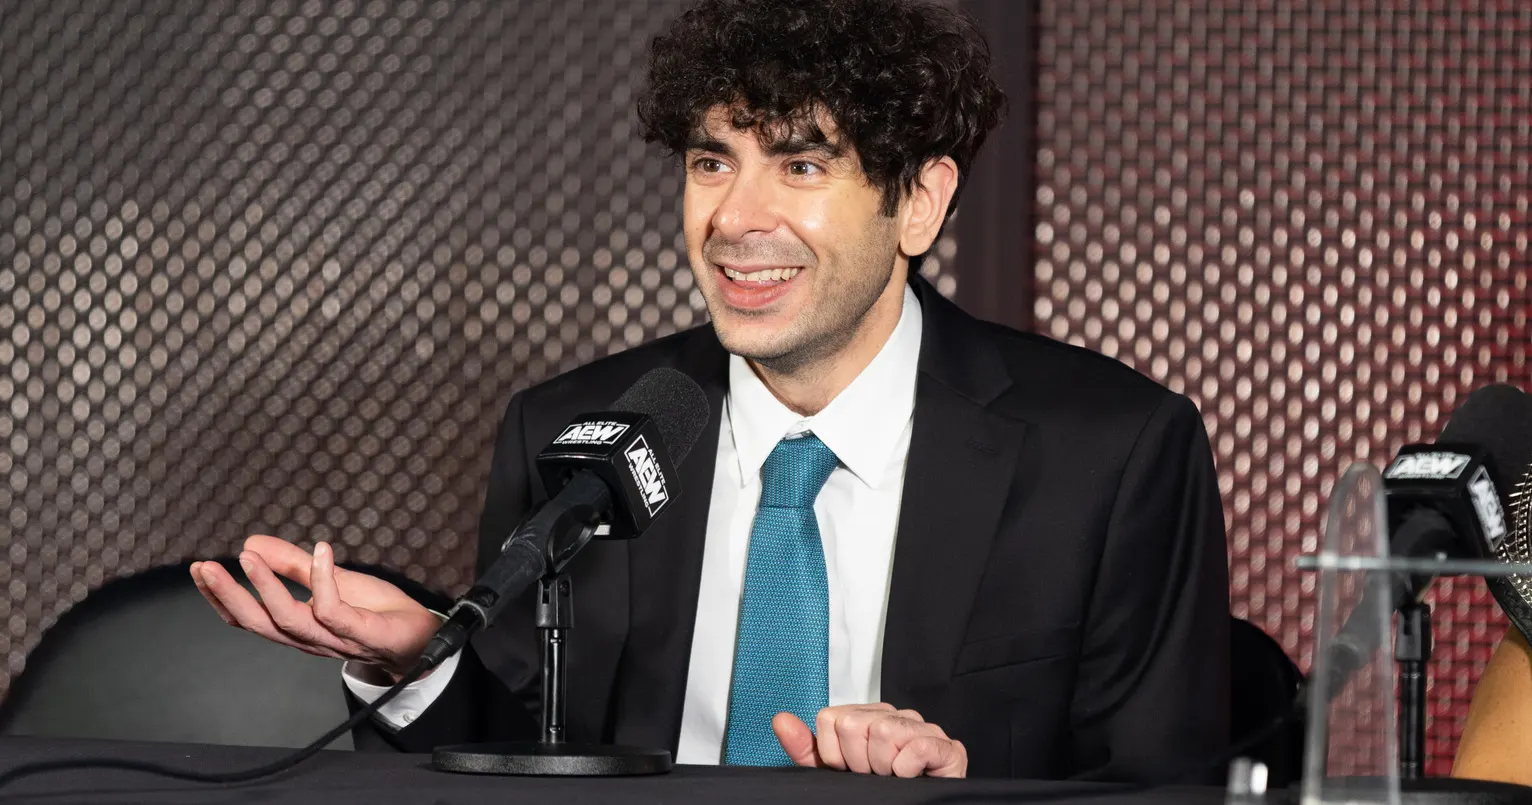 Tony Khan Comments On AEW's Declining Viewership